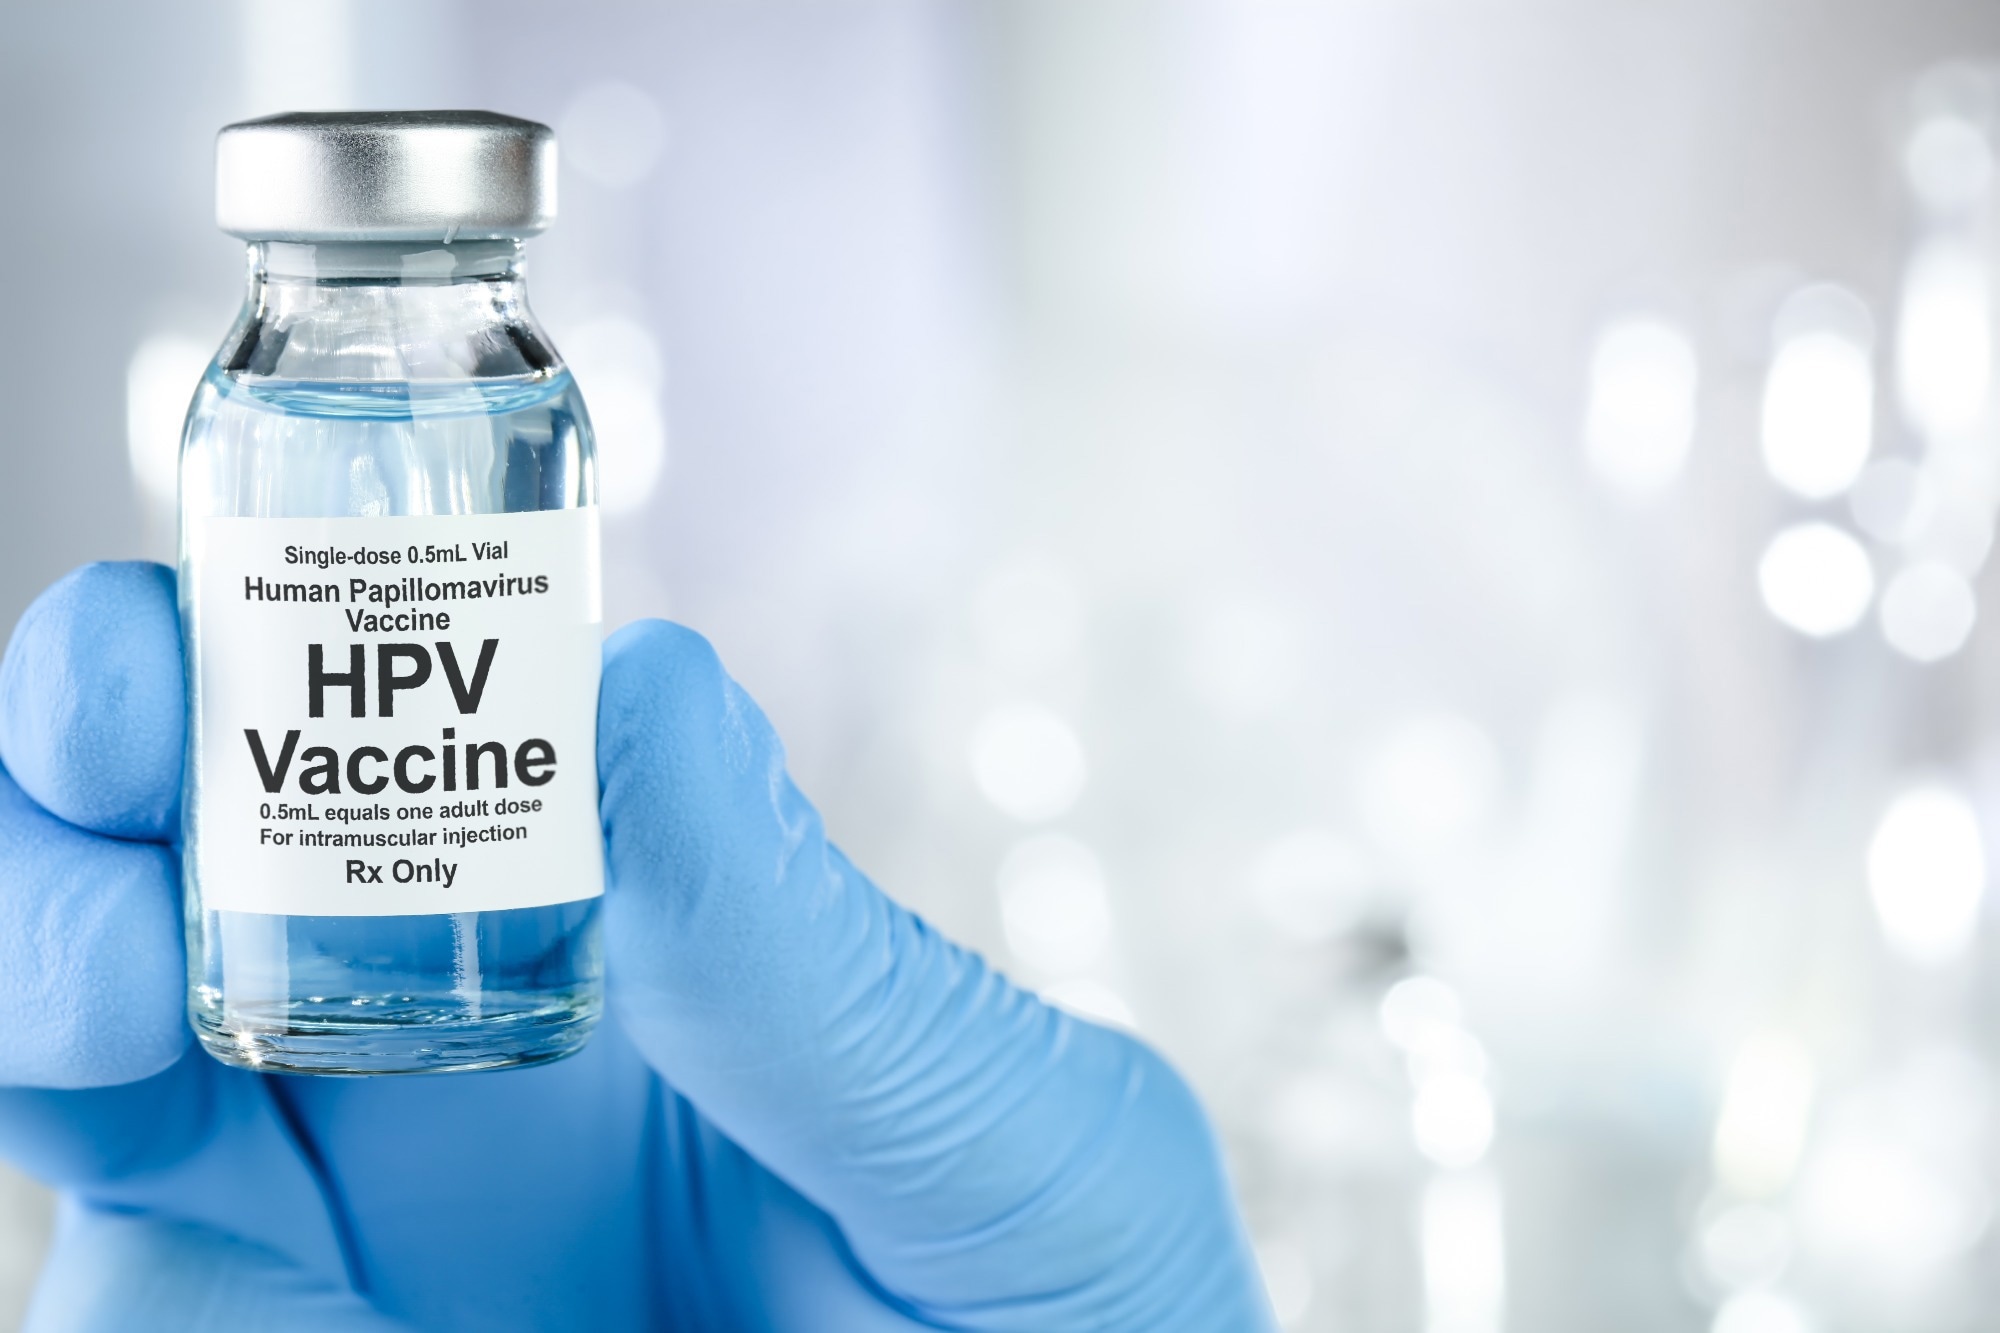 Study: The one-dose schedule opens the door to rapid scale-up of HPV vaccination. Image Credit: Leigh Prather/Shutterstock.com